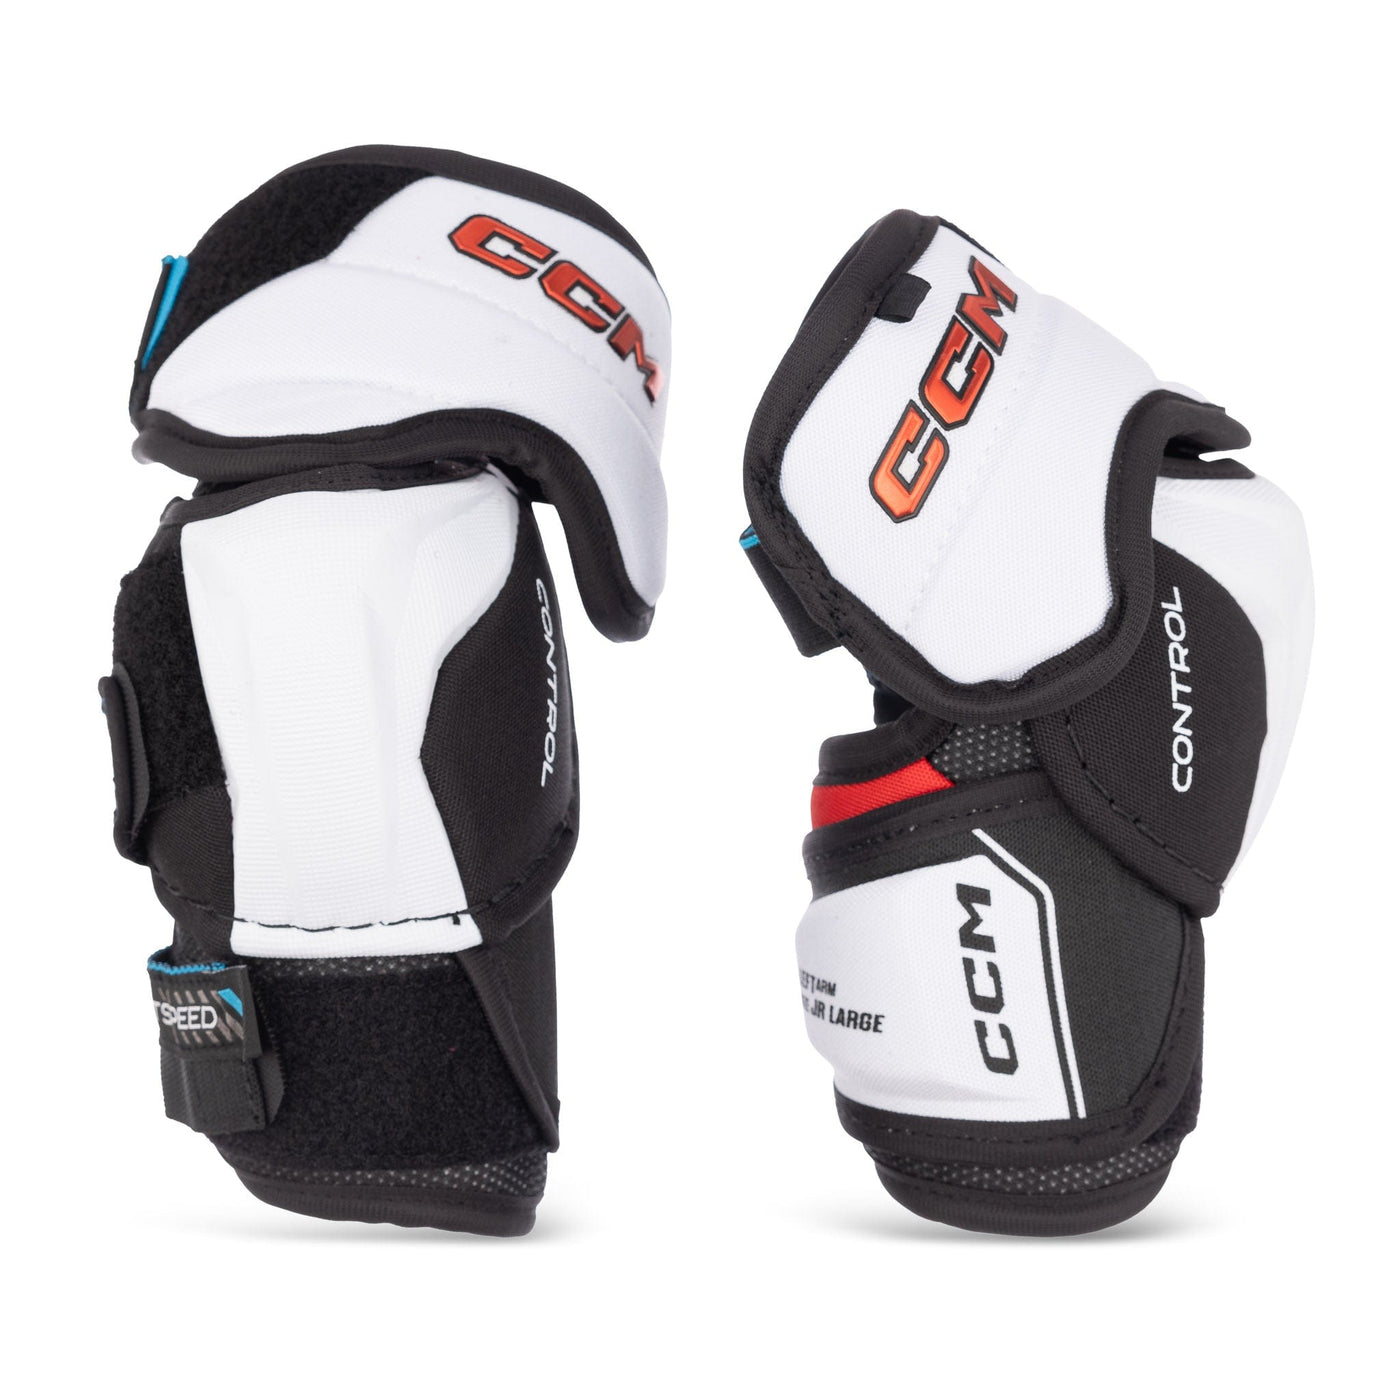 CCM Jetspeed Control Junior Hockey Elbow Pads - The Hockey Shop Source For Sports